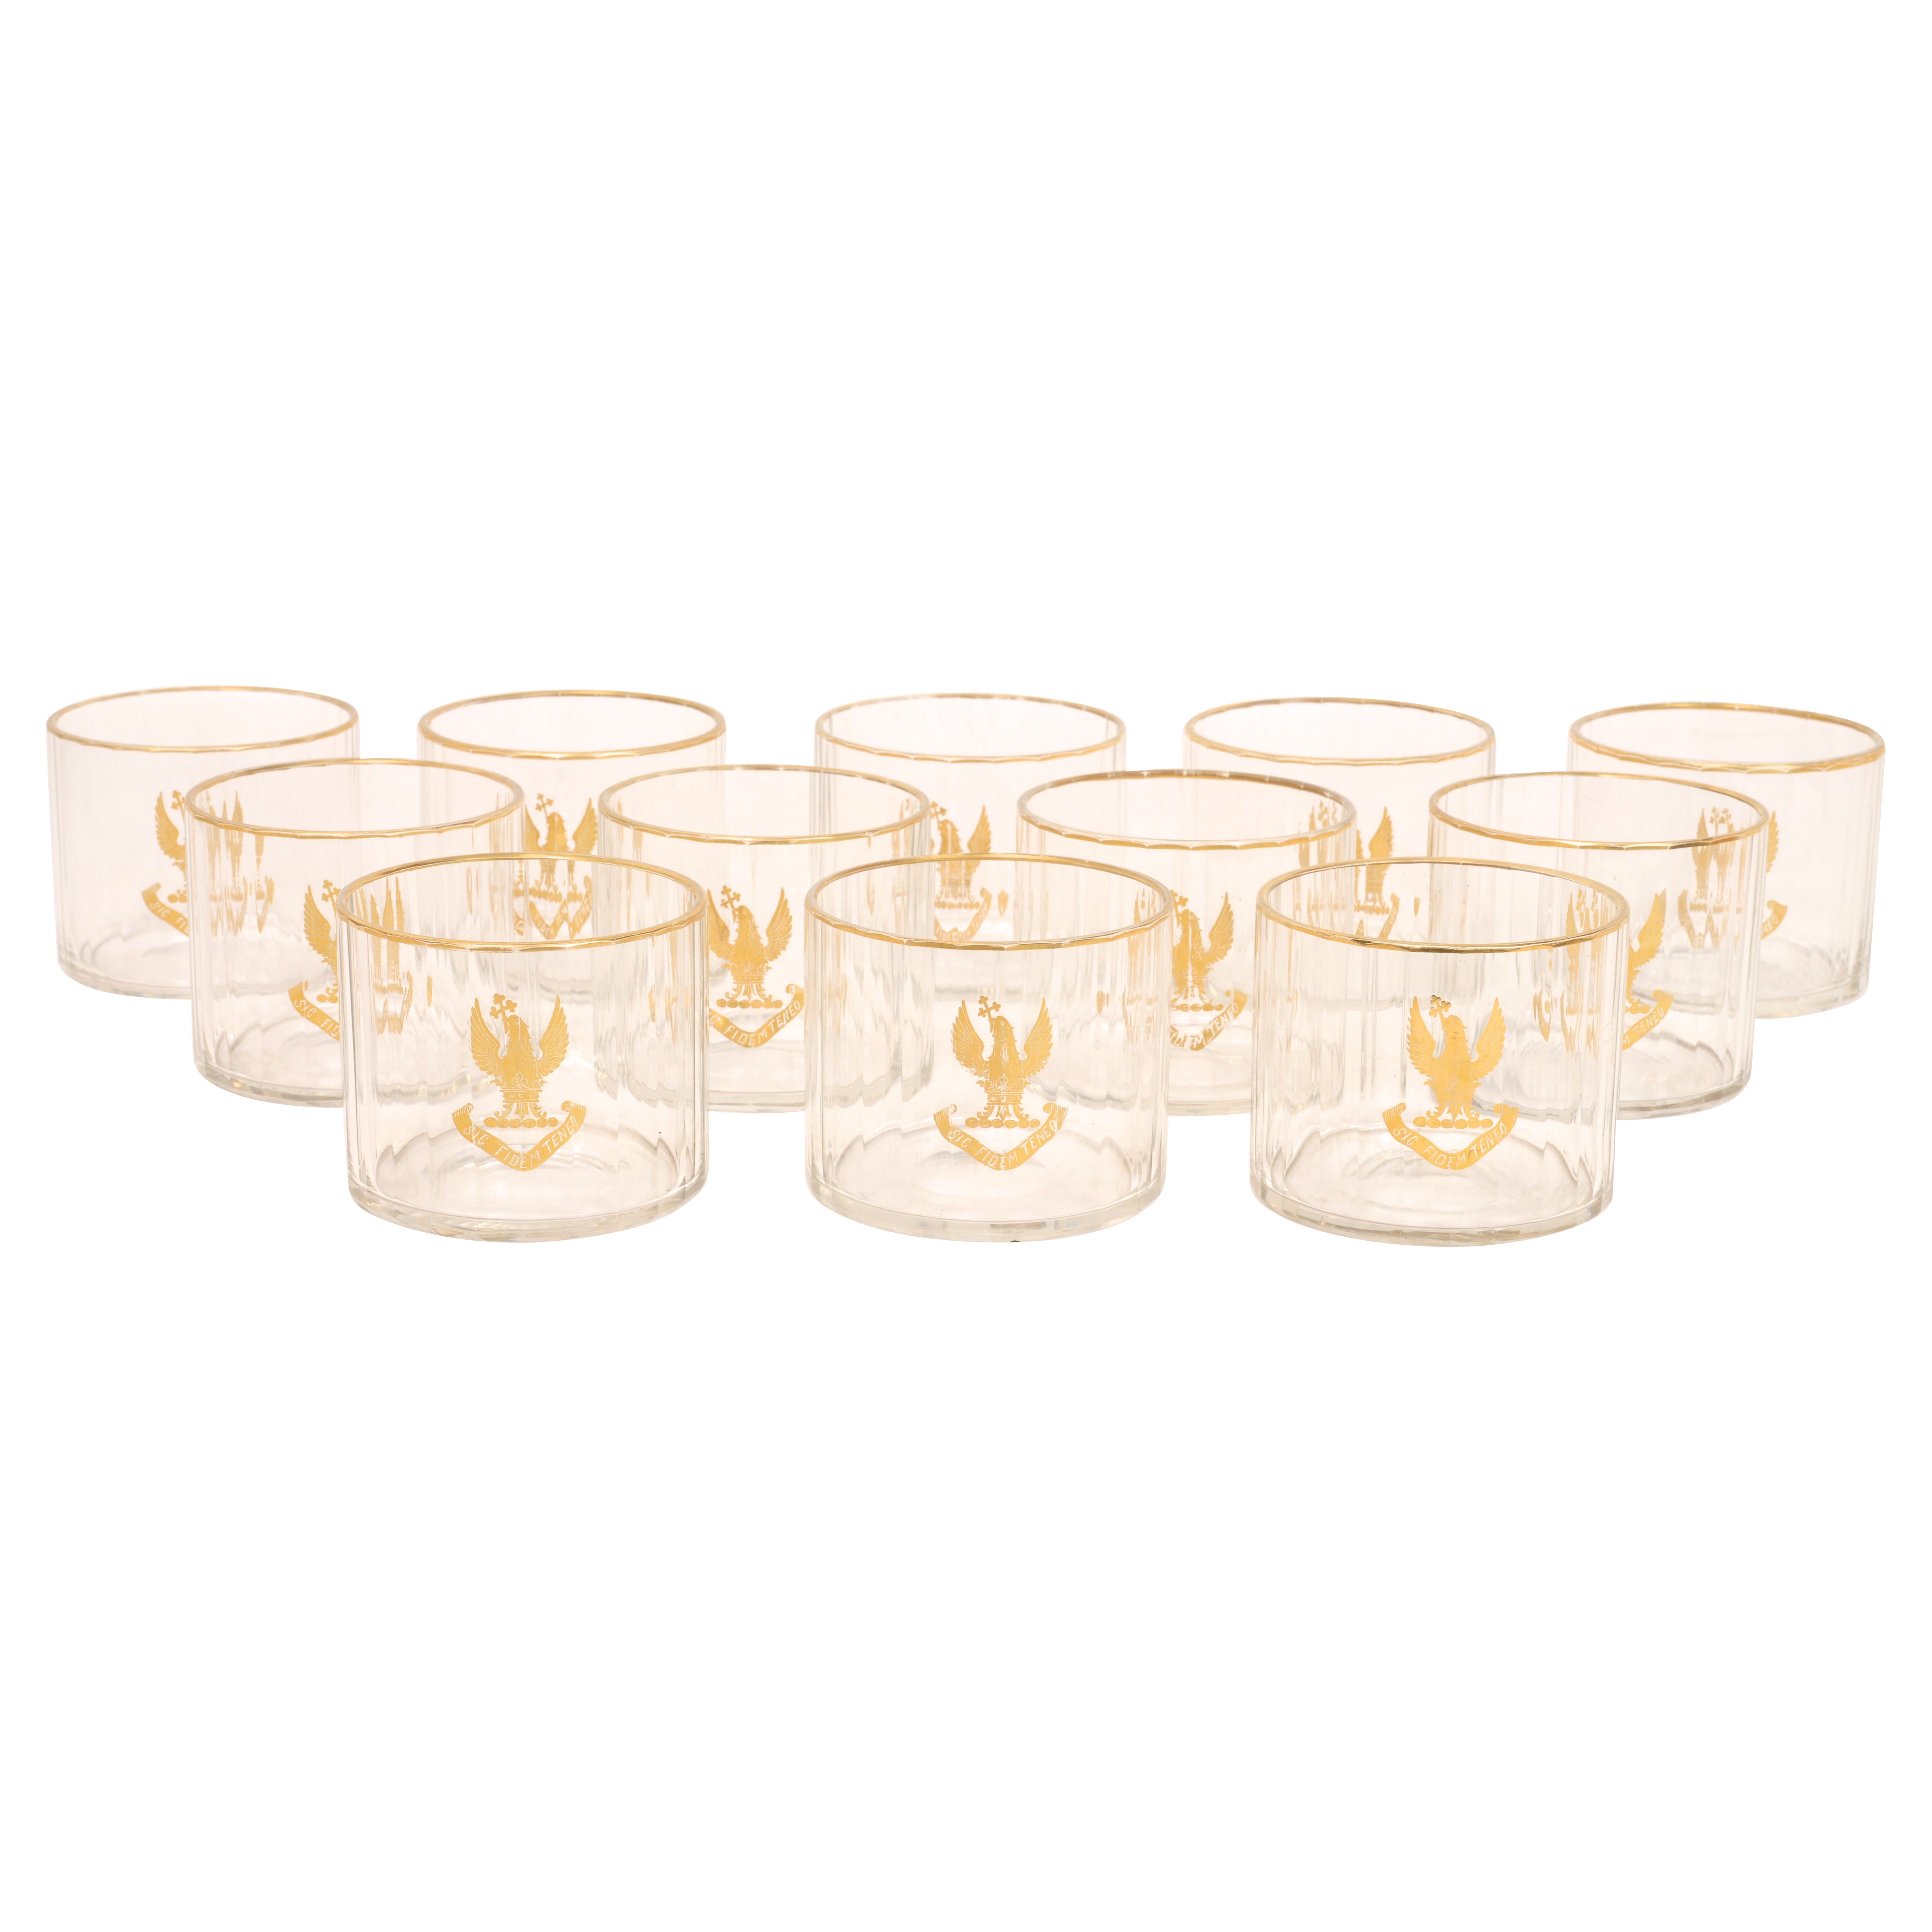 Set of 12 Armorial Straight Facet-Cut 24 Panel Gilt Decorated Crystal Glasses